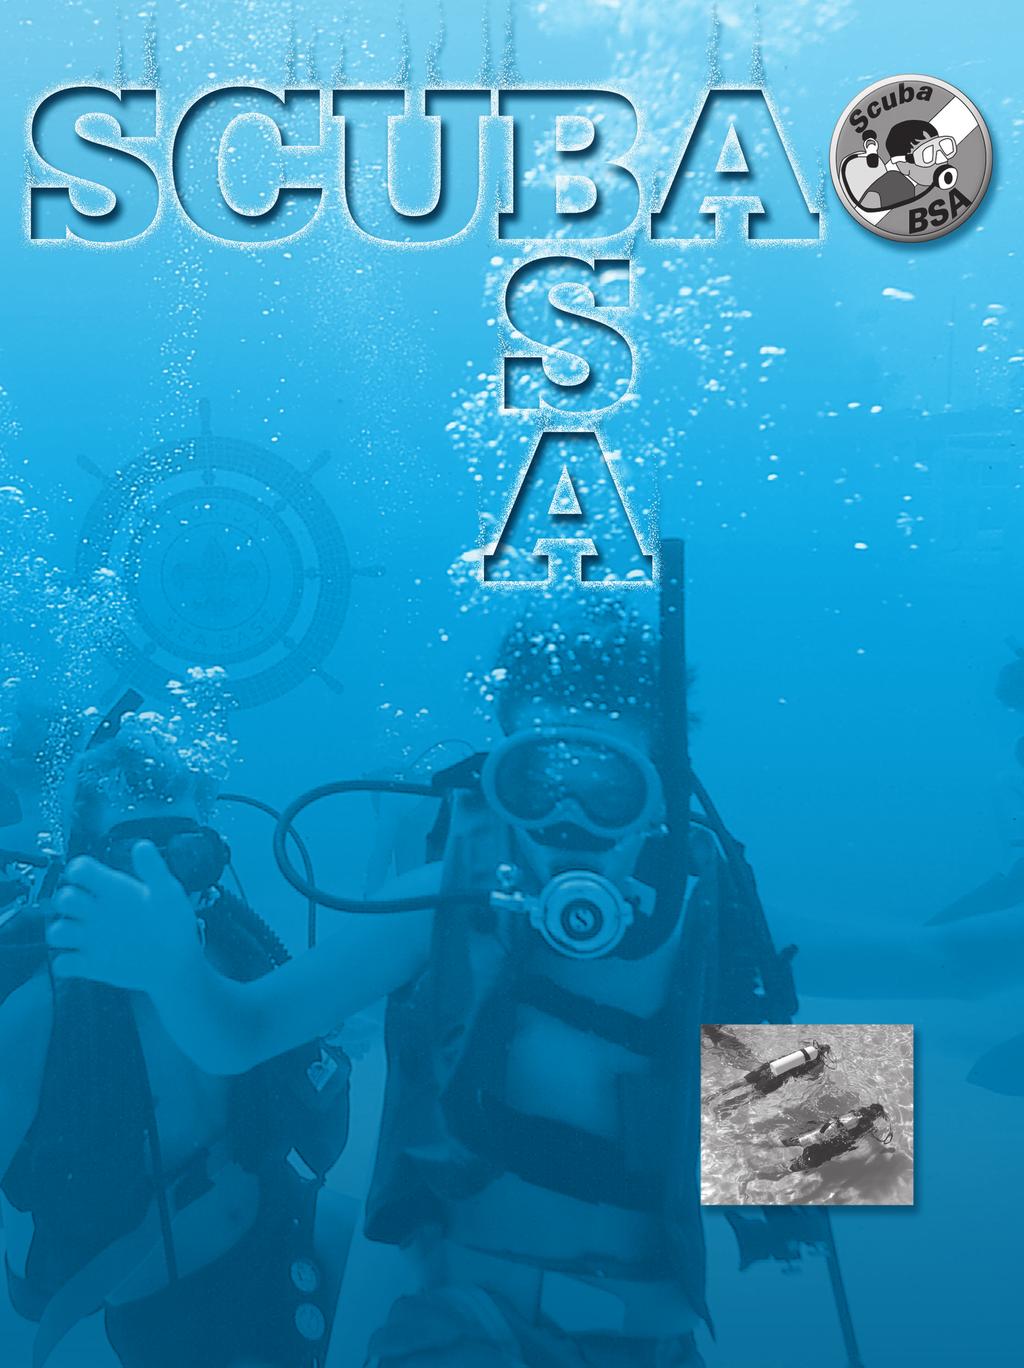 The Scuba BSA program was created and implemented with